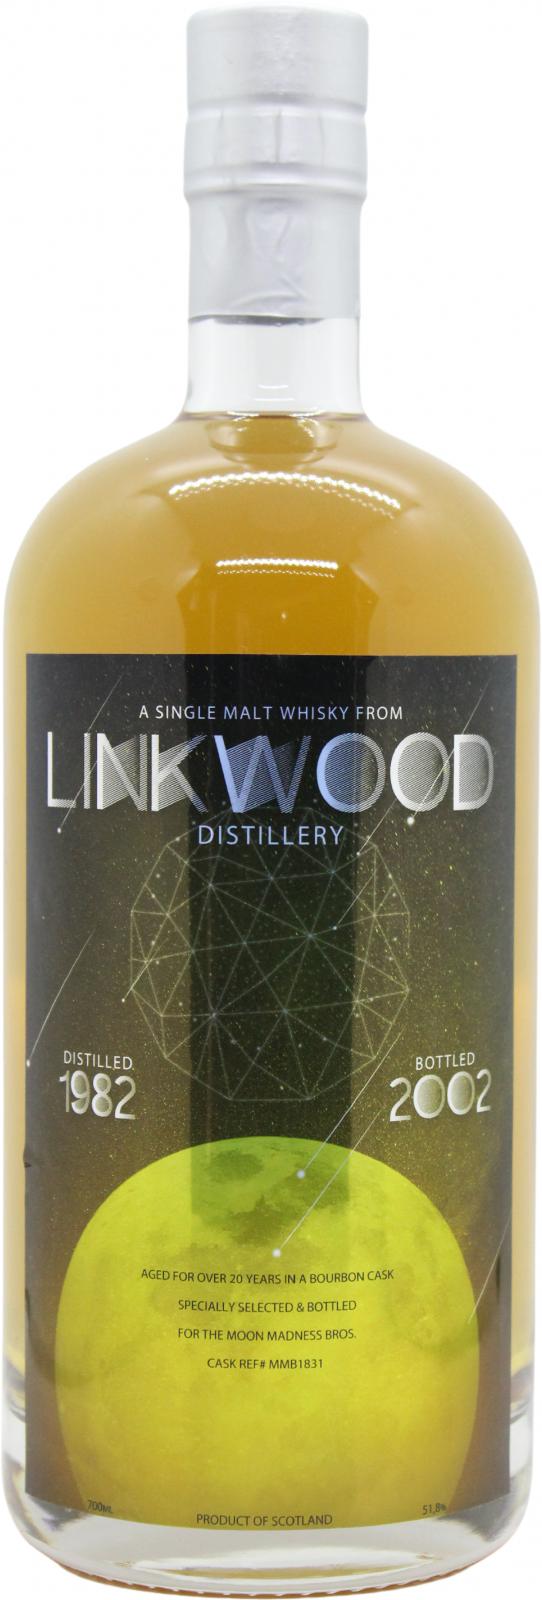 Linkwood 1982 UD The Moon Madness Bros Bourbon Cask MMB1831 Private Bottling 51.8% 700ml